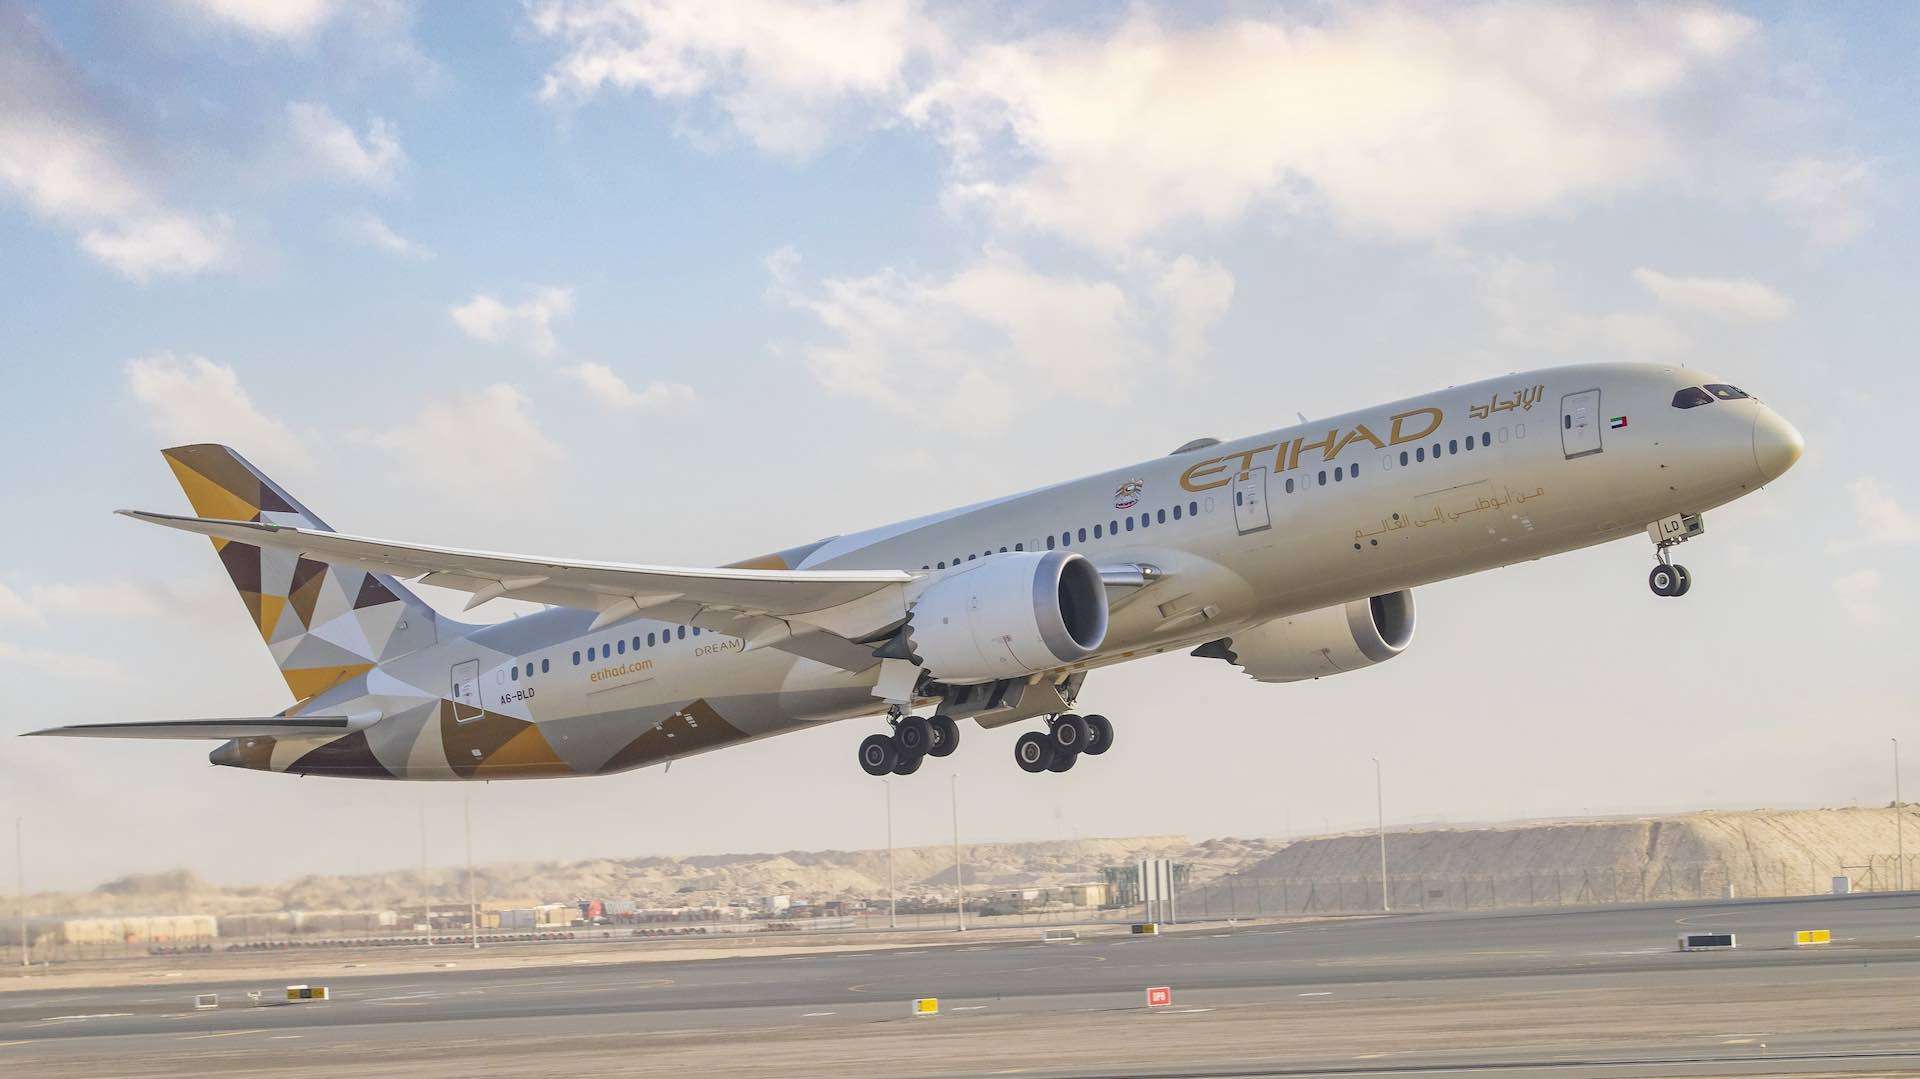 OAG rates Etihad Airways as the most punctual airline in the Middle East